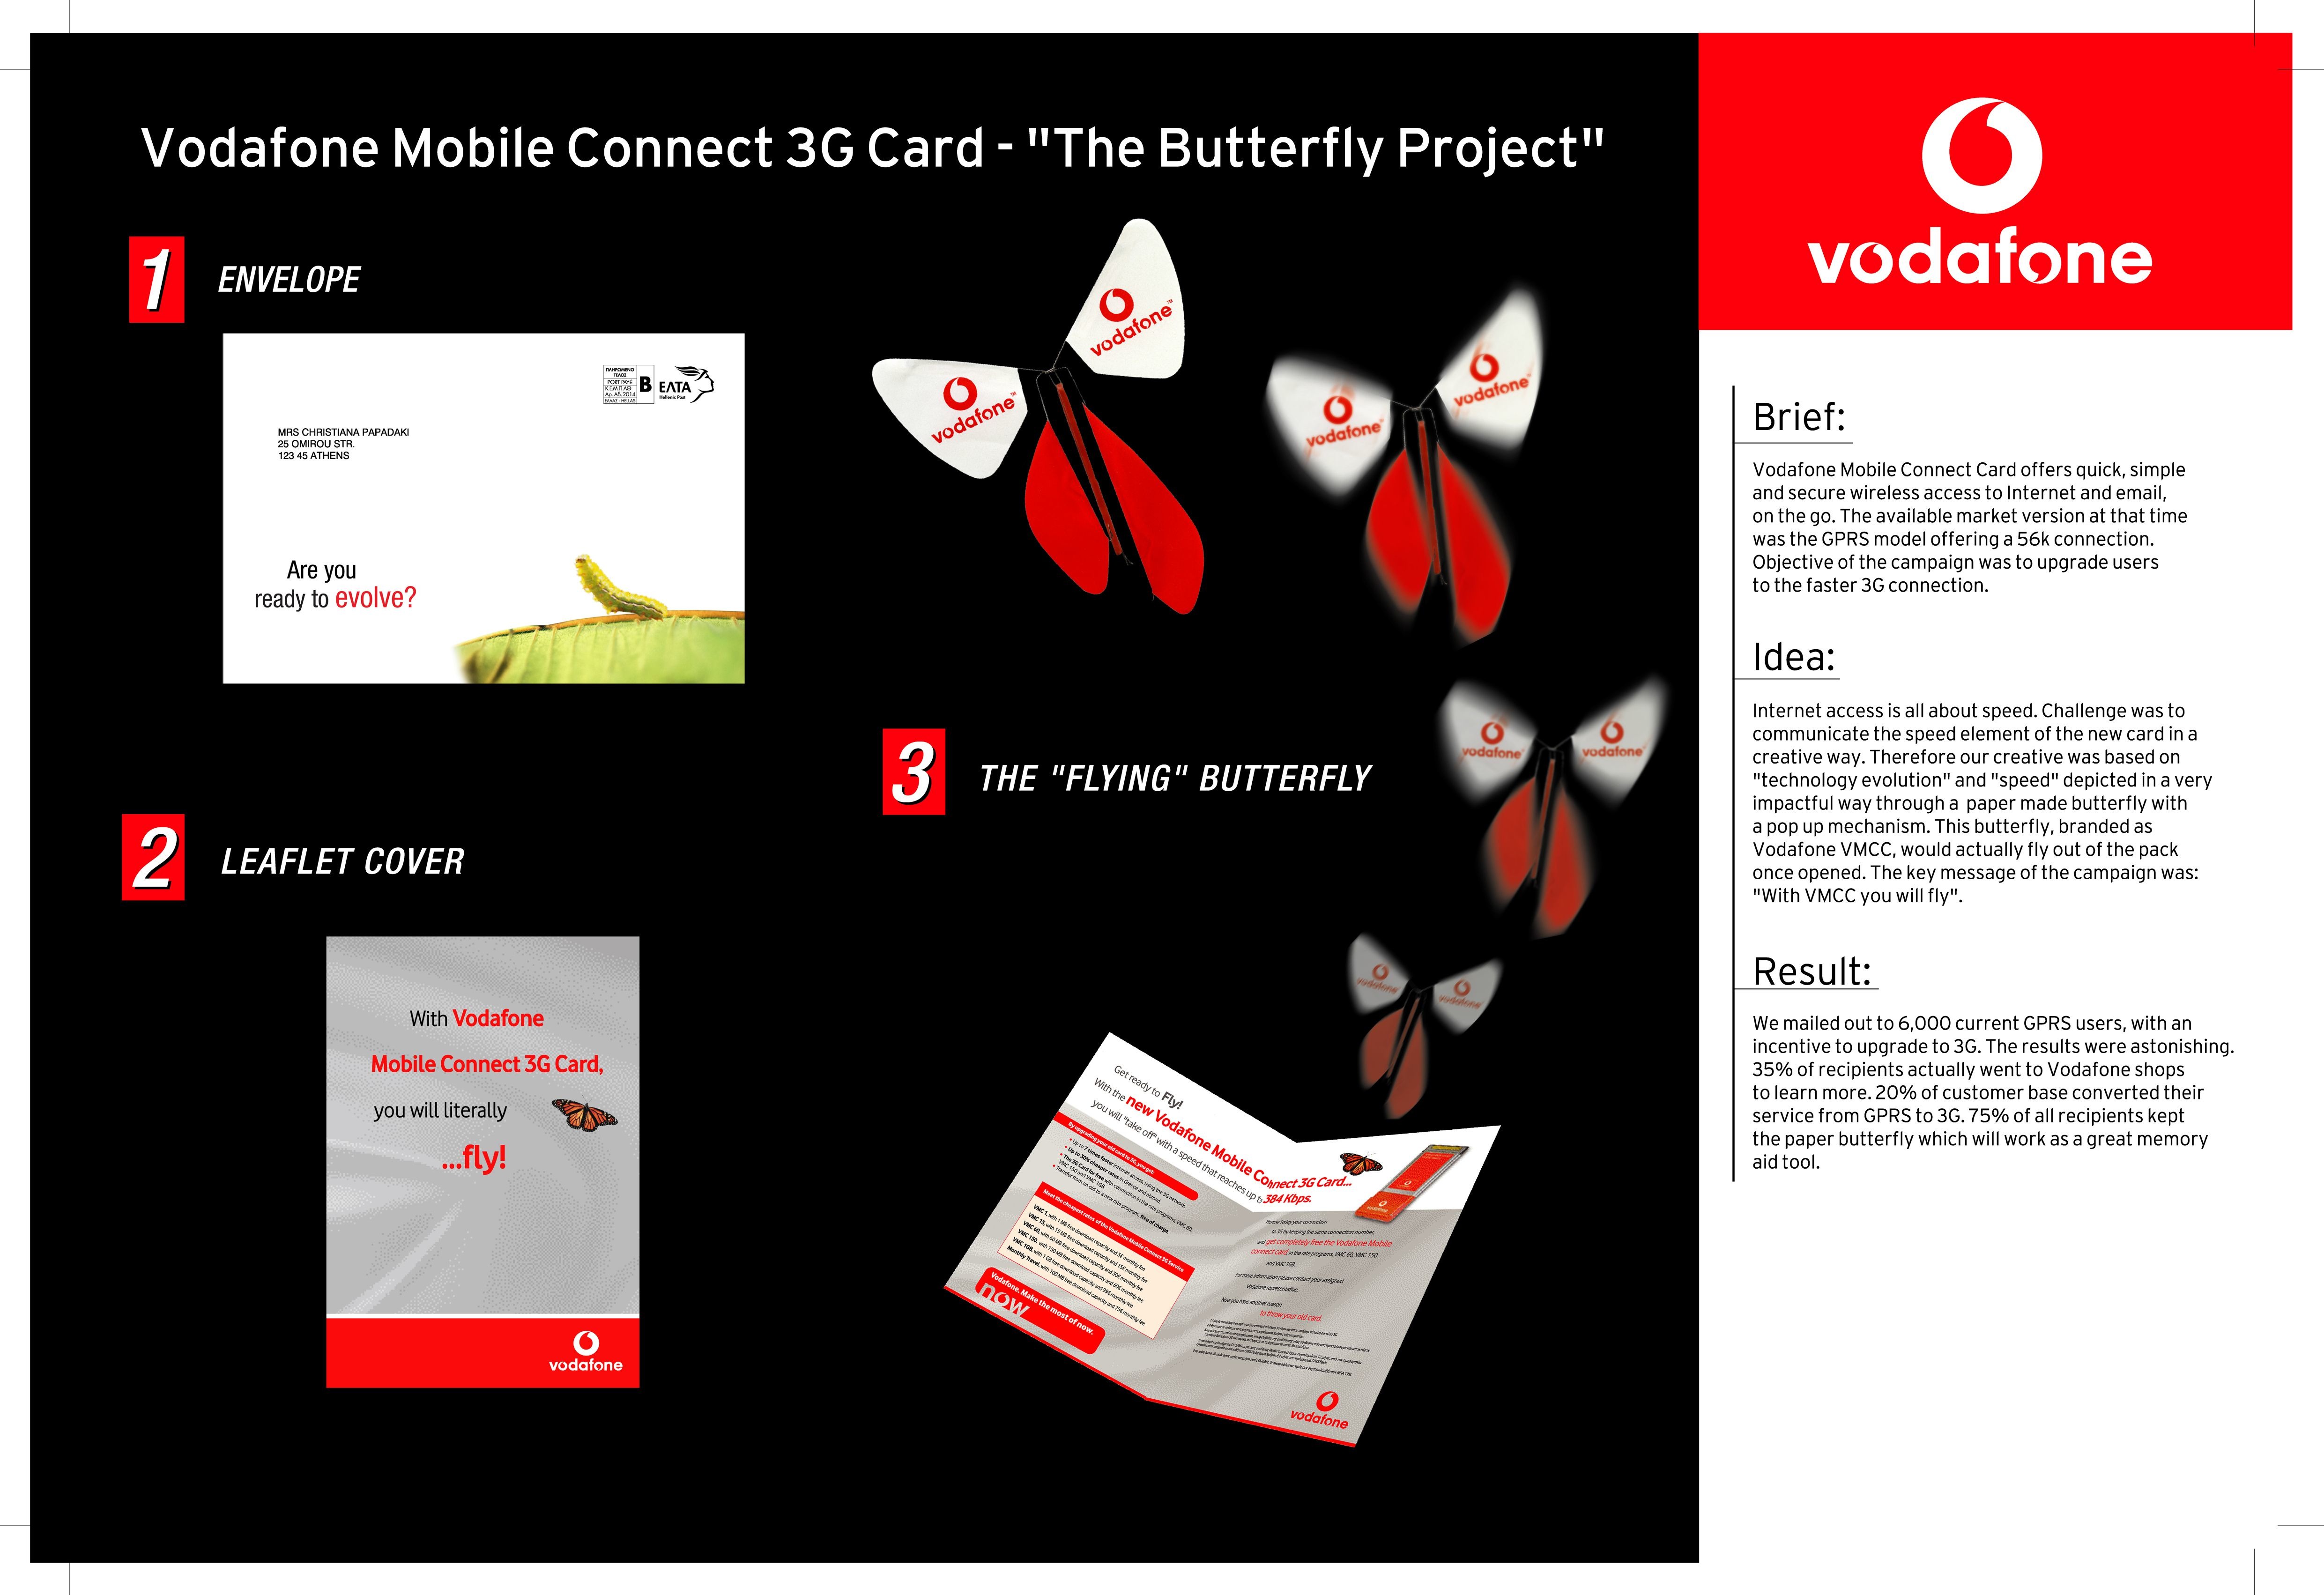 MOBILE CONNECT 3G CARD